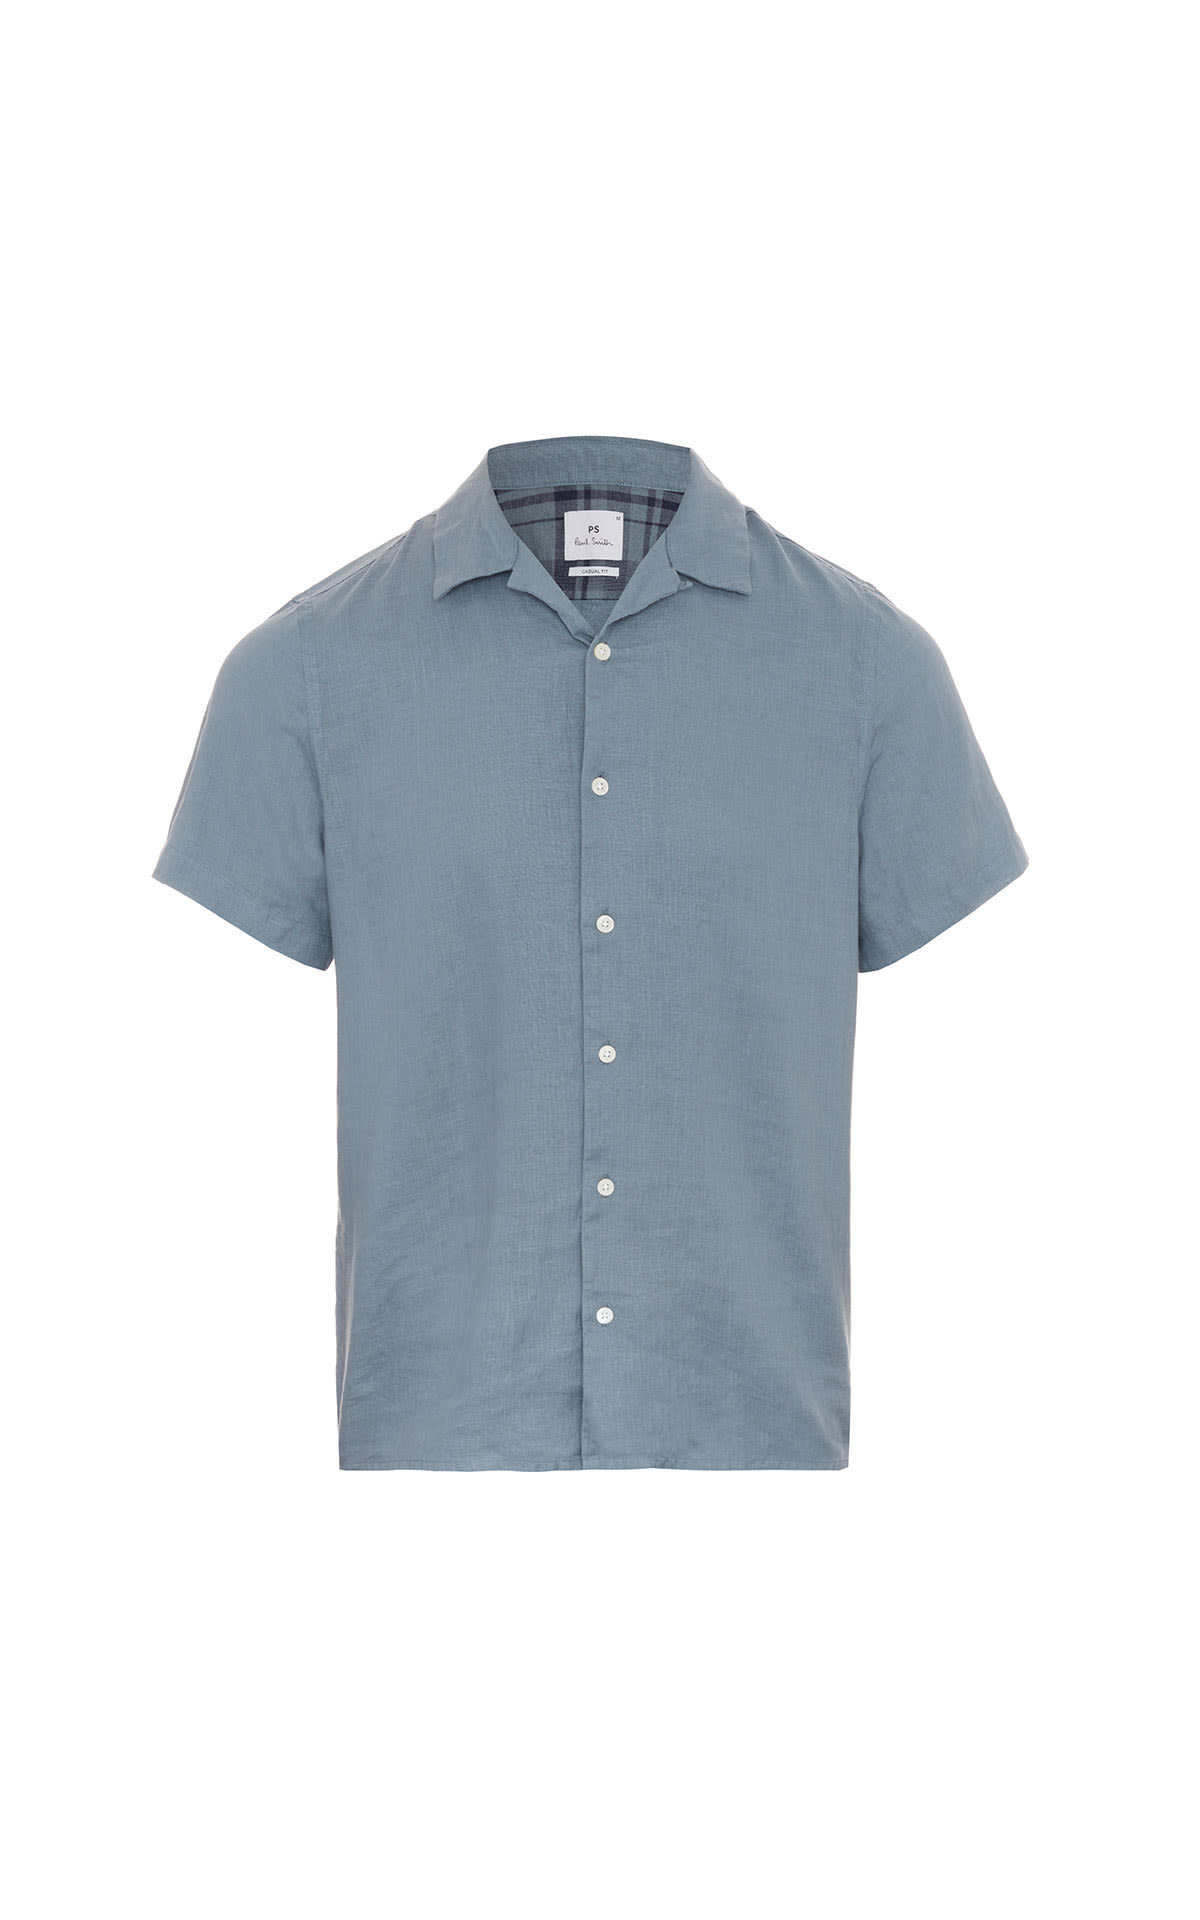 Paul Smith Short sleeve shirt from Bicester Village